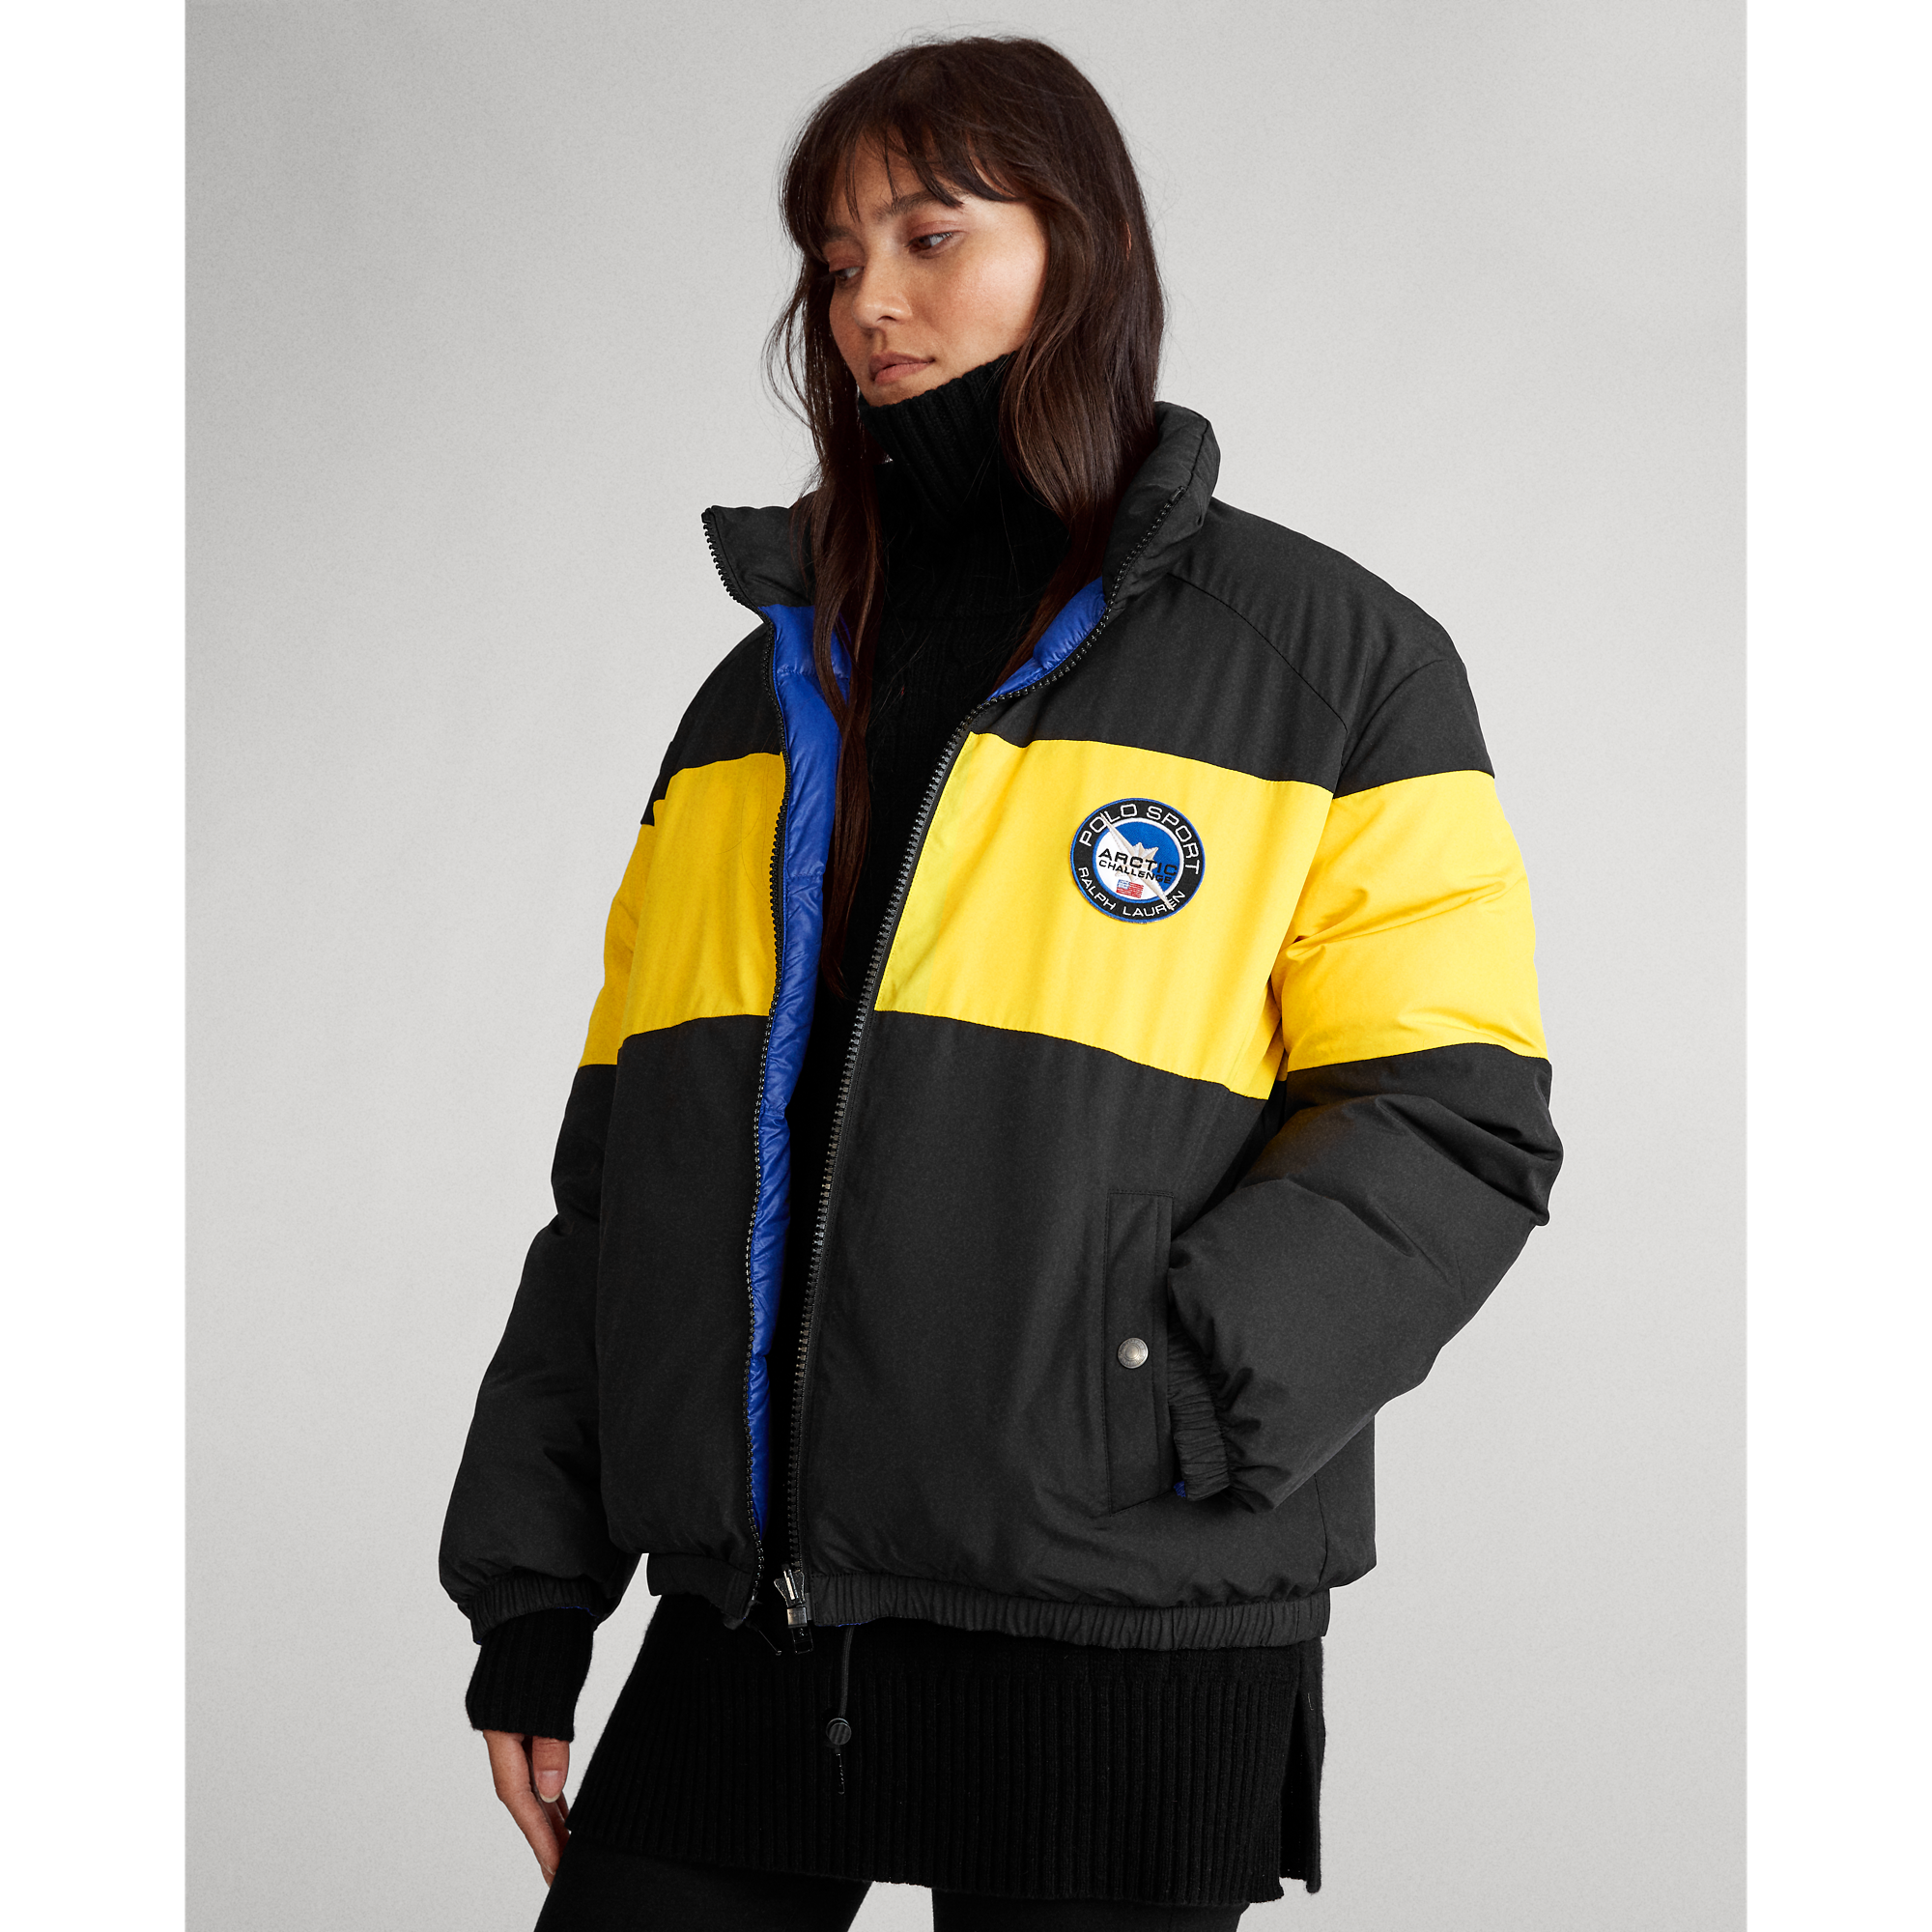 Reversible Down Jacket by Polo Ralph Lauren, available on ralphlauren.com Gigi Hadid Outerwear Exact Product 